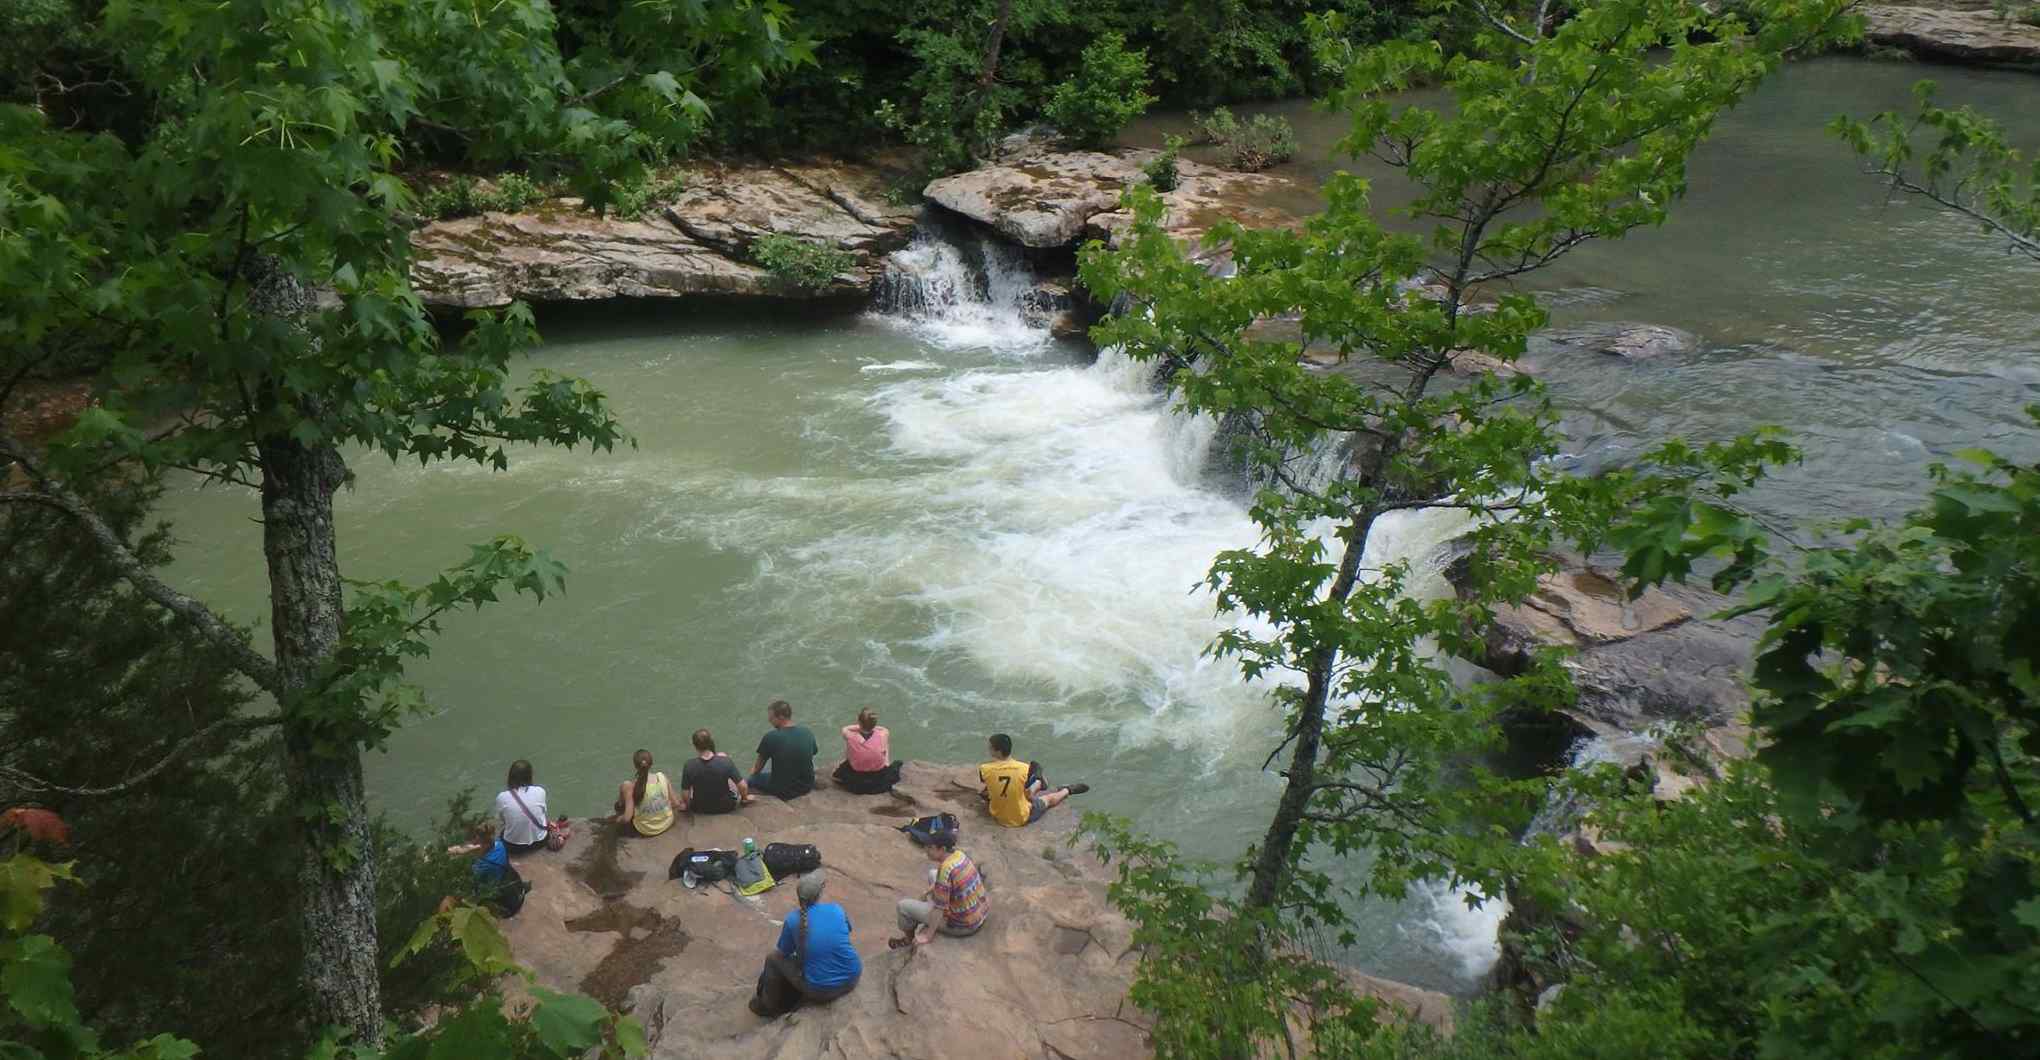 University of Arkansas REU Research Experience for Undergraduates field trip to King's River Falls